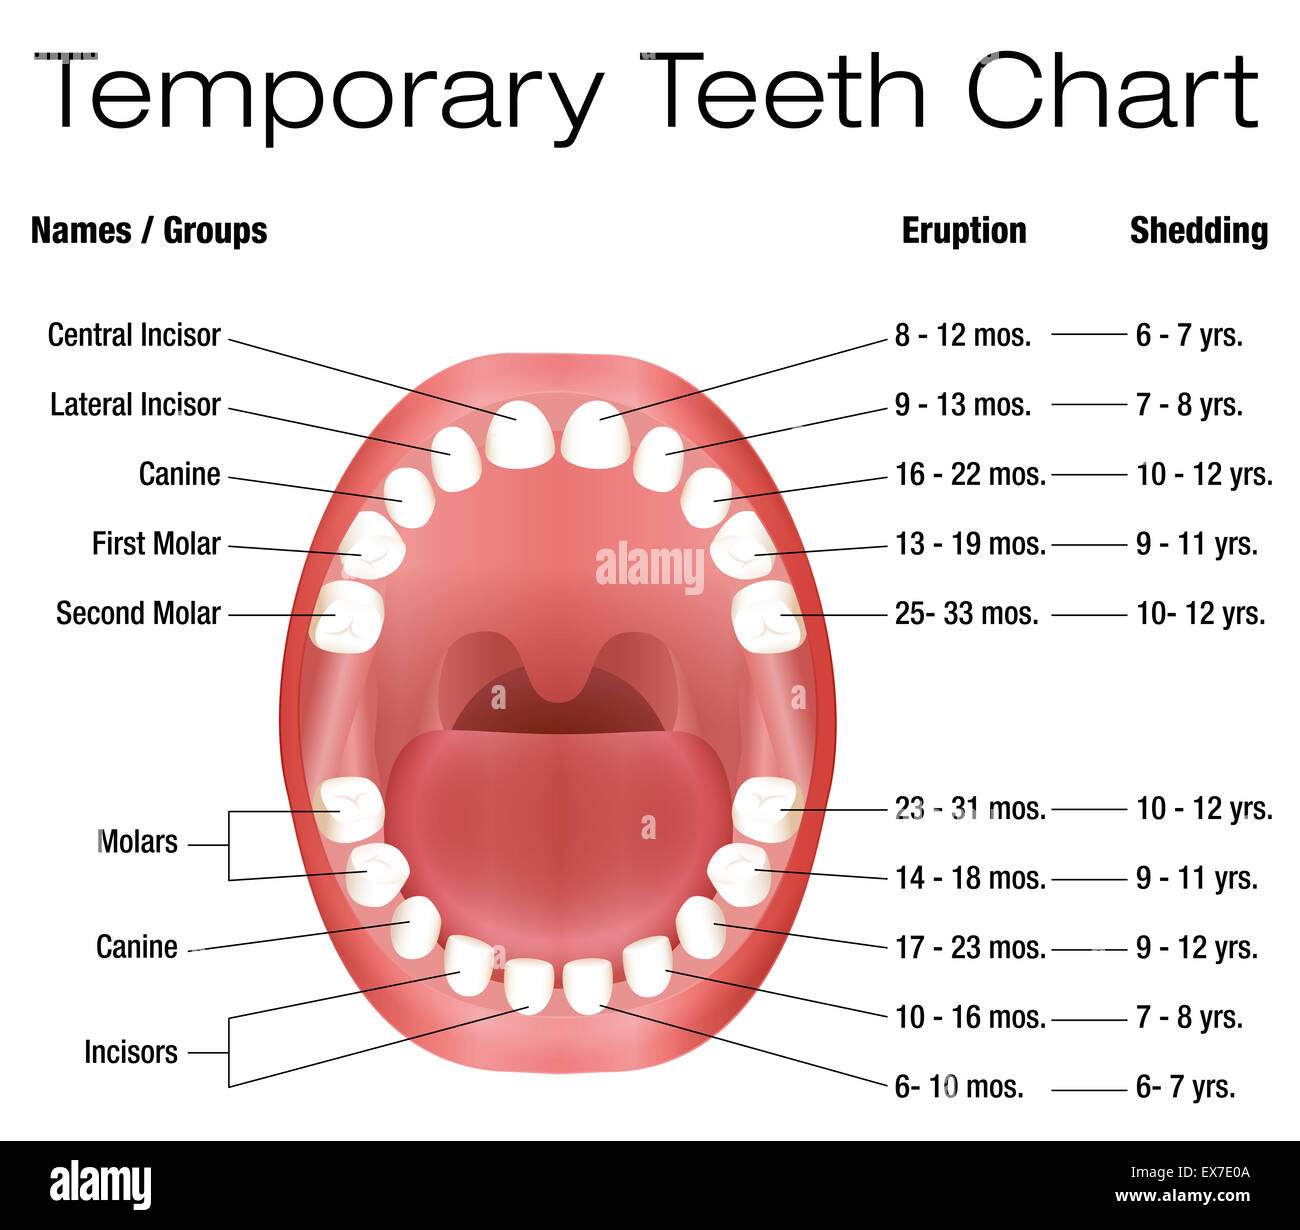 Temporary teeth - names, groups, period of eruption and shedding of the children´s teeth. Stock Photo